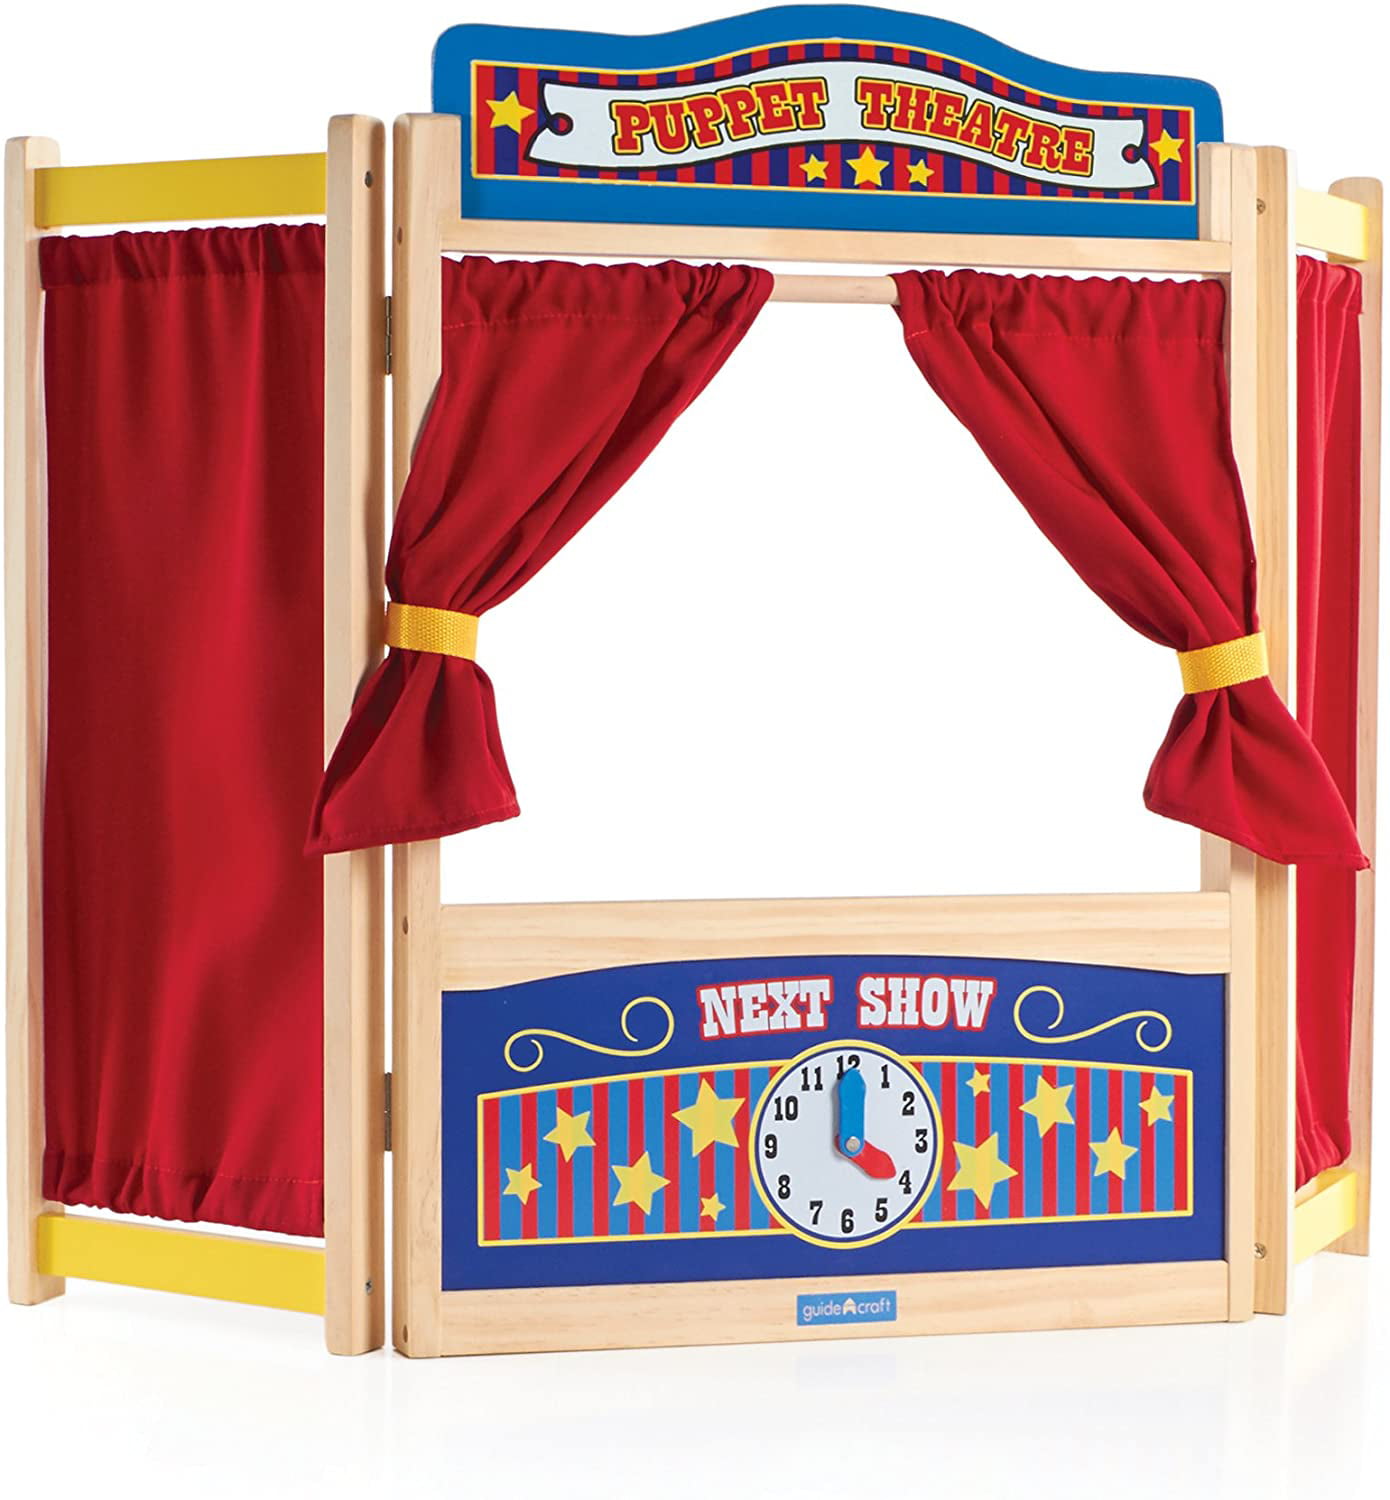 Guidecraft Wooden Tabletop Puppet Theater For Kids - Toddler's Foldable  Dramatic Play Imaginative Theater W/ Chalkboard, Curtains and Clock,.., By  